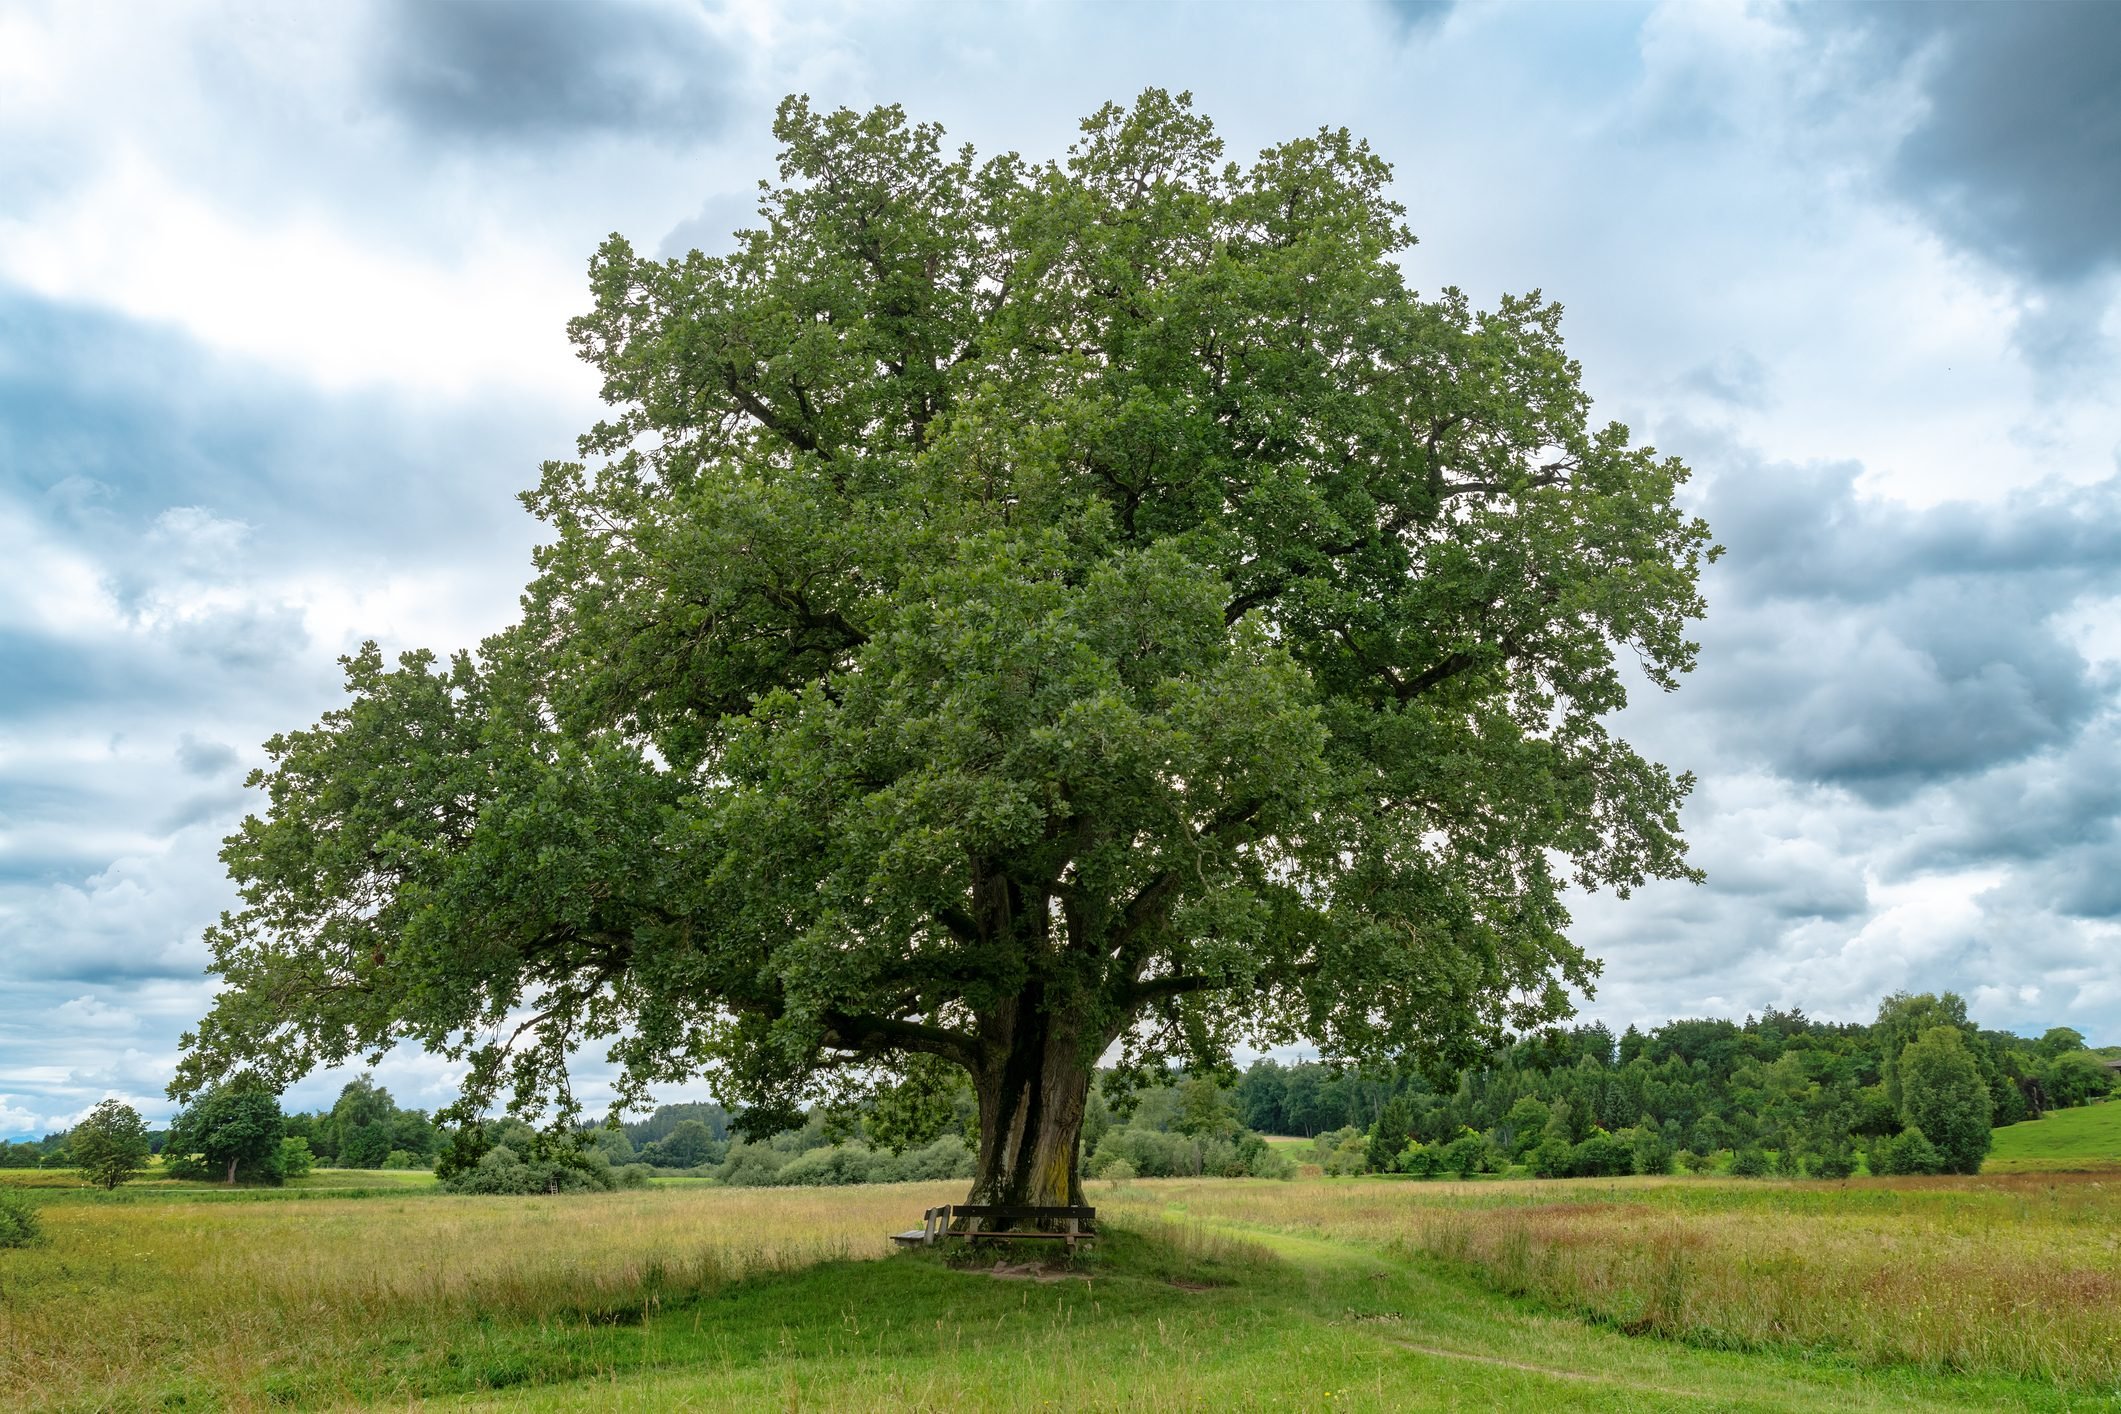 <p>Oak trees are a <a href="https://www.familyhandyman.com/article/what-is-a-keystone-plant-and-how-does-it-support-wildlife/" rel="noopener noreferrer">keystone species</a> across the country, collectively supporting nearly 500 species of caterpillars. Their acorns also feed deer, rabbits, birds, squirrels and foxes. Some oaks even support bats.</p> <p>"Oaks are rich in history due to their stature, quality hardwood and benefits to wildlife," says Glassey. "Some feel worried these giants will fall [down], but just remember to give them proper <a href="https://www.familyhandyman.com/article/homeowners-guide-to-soil-ecosystems/" rel="noreferrer noopener noreferrer">soil conditions</a>, nutrients and water."</p> <p>You'll need a big yard to plant most oaks, of course, and there are a lot to choose from. Out of the more than 50 native to the U.S., keystone species by region include: white and black oaks for northern forests; bur oak, post oak and blackjack oak for the Great Plains; and Gambel and scrub oak for North American deserts.</p> <p>Most oaks prefer well-draining sunny locations and benefit from regular watering and minimal pruning.</p>